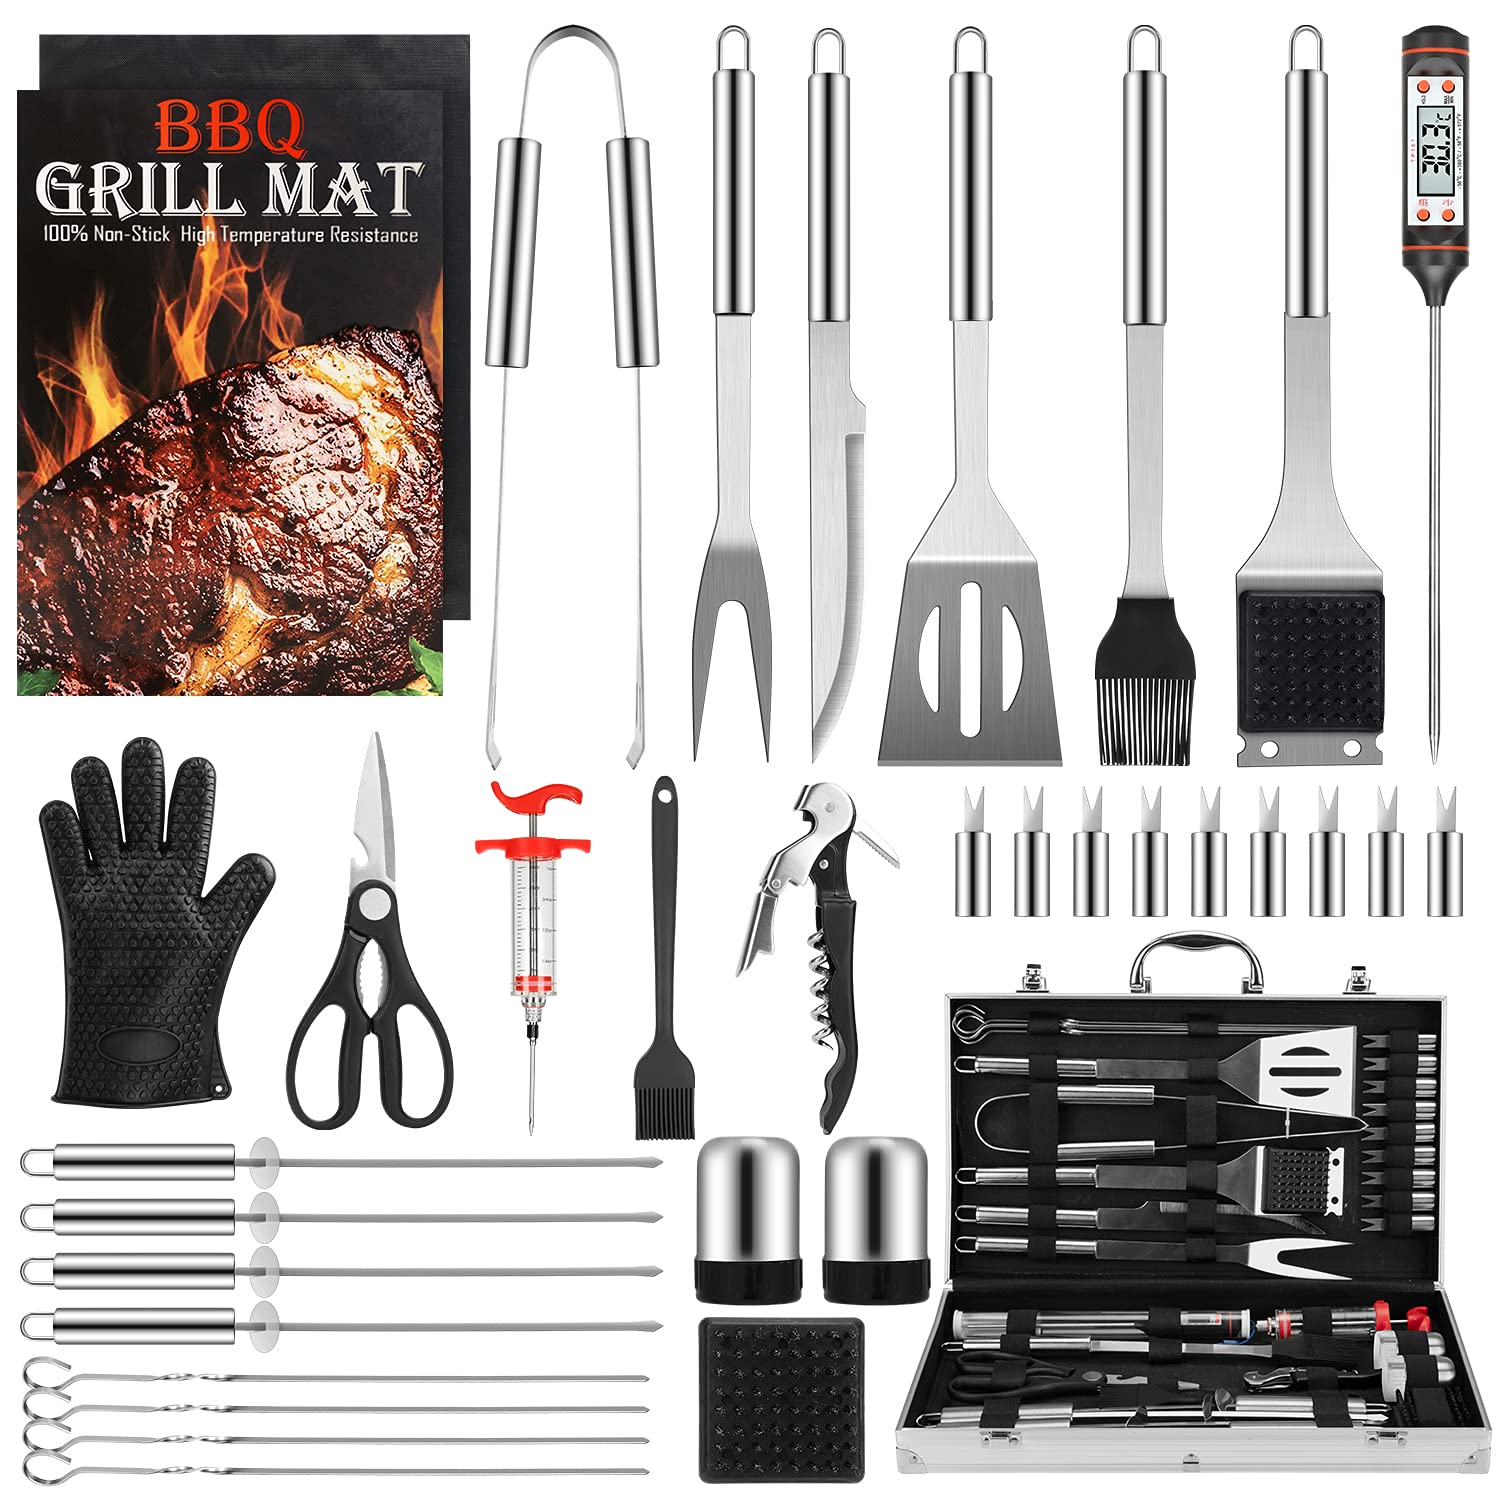 GCP Products GCP-US-578468 Grill Set, Grill Tools, Grill Bbq Accessories,  Grilling Gifts For Men, 34Pcs Bbq Tools For Outdoor Grill With Aluminum  Case, …